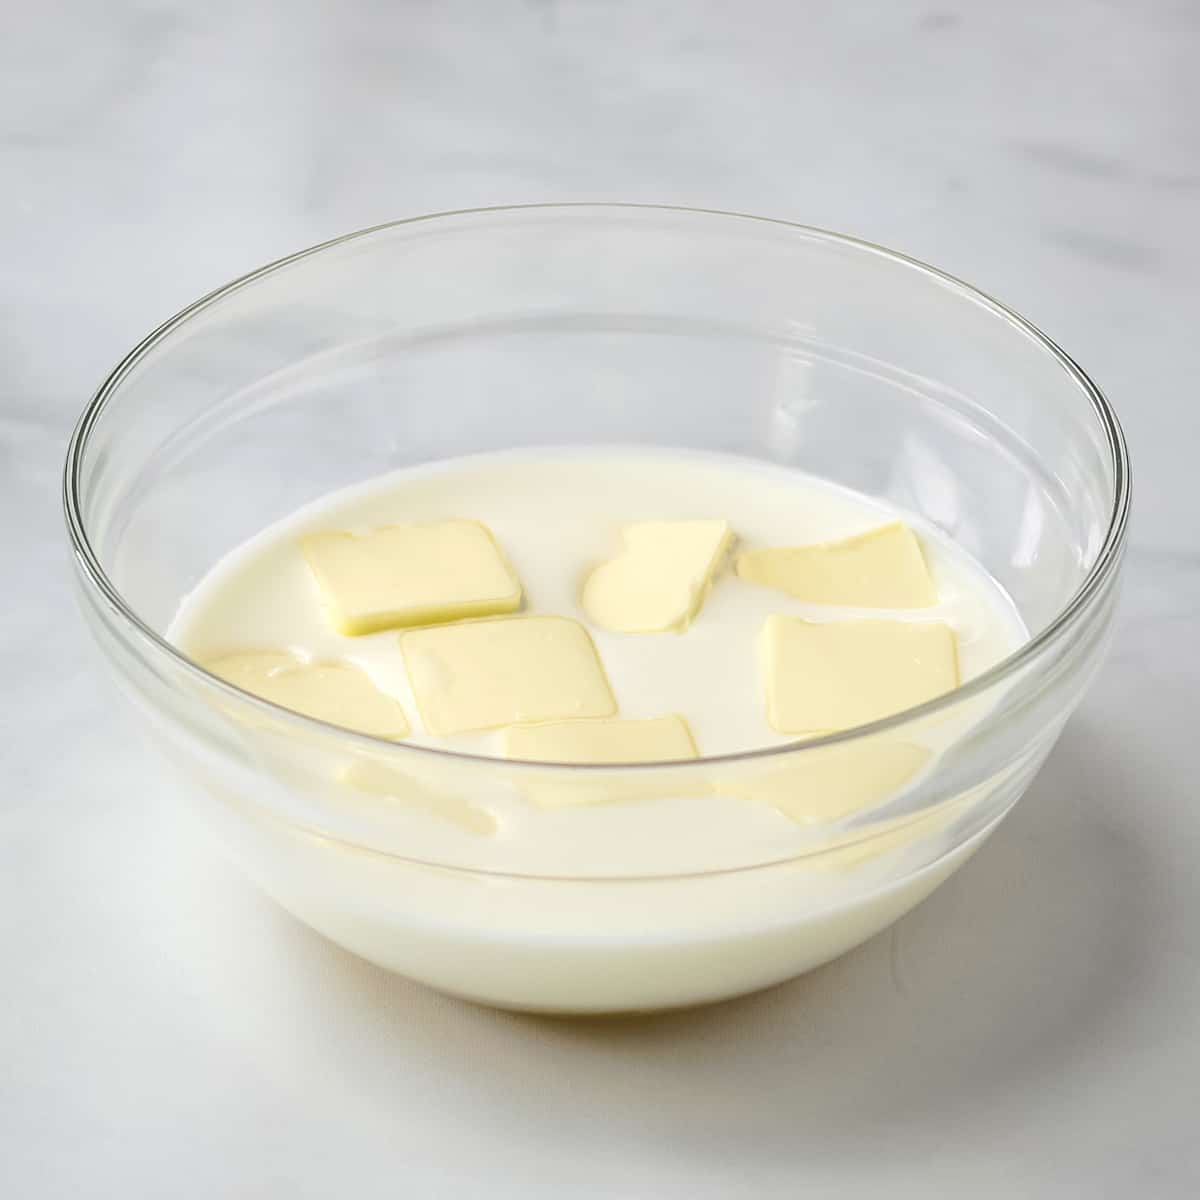 Sliced butter pads in a glass bowl filled with milk and sugar.